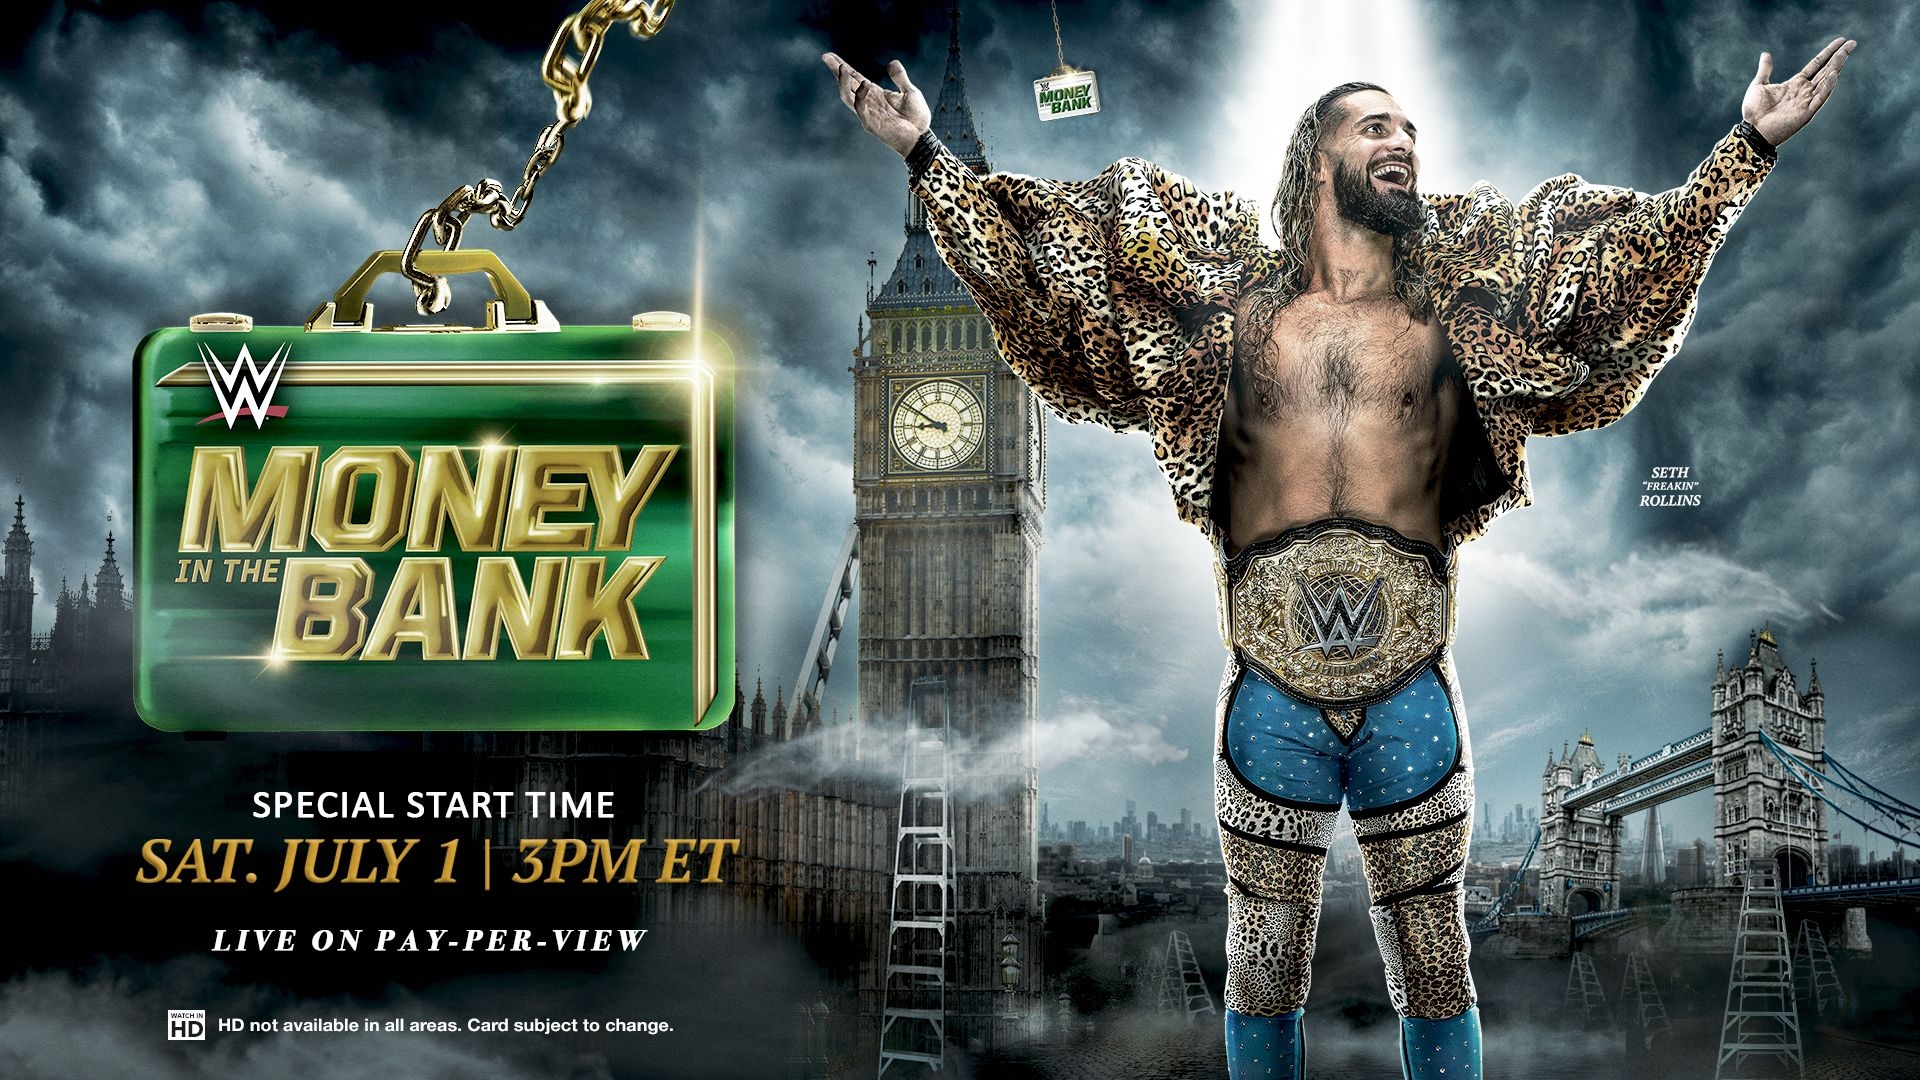 WWE Money in the Bank, live Saturday, July 1, on Pay-Per-View with Spectrum TV.